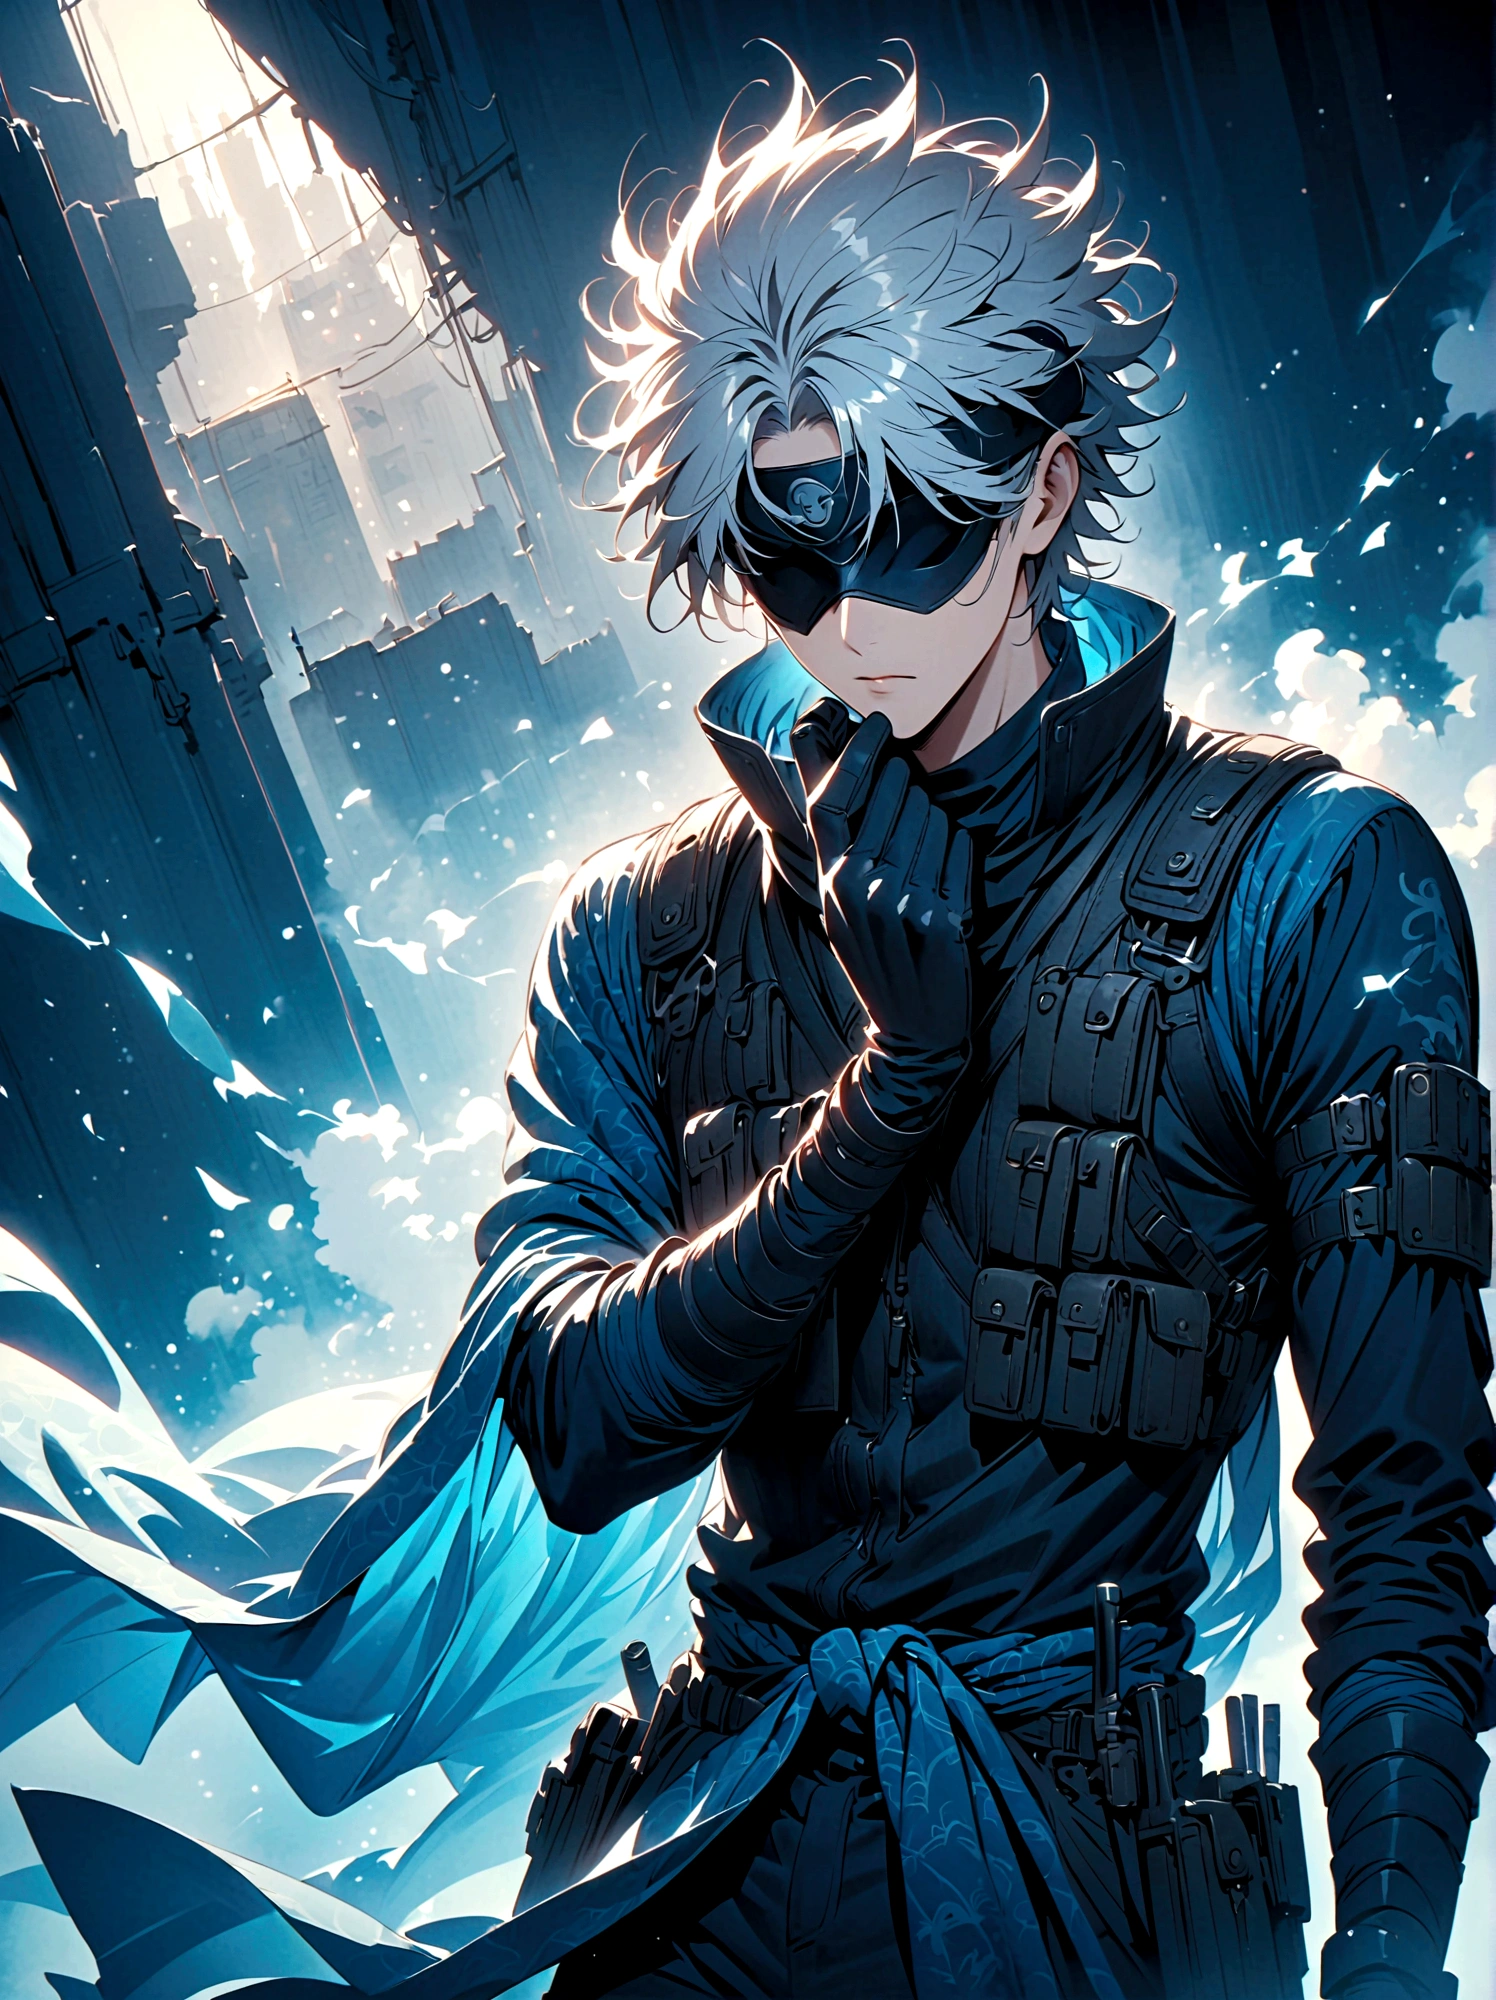 A fictional anime character sporting a silver spiky hair, wearing a headband tilted to cover one eye. He is dressed in a typical ninja attire, complete with a flak jacket, the fabric is in shades of blue and green. He also wears gloves and his mask is pulled up to cover the lower half of his face. He carries an aura of mystery and coolness around him.